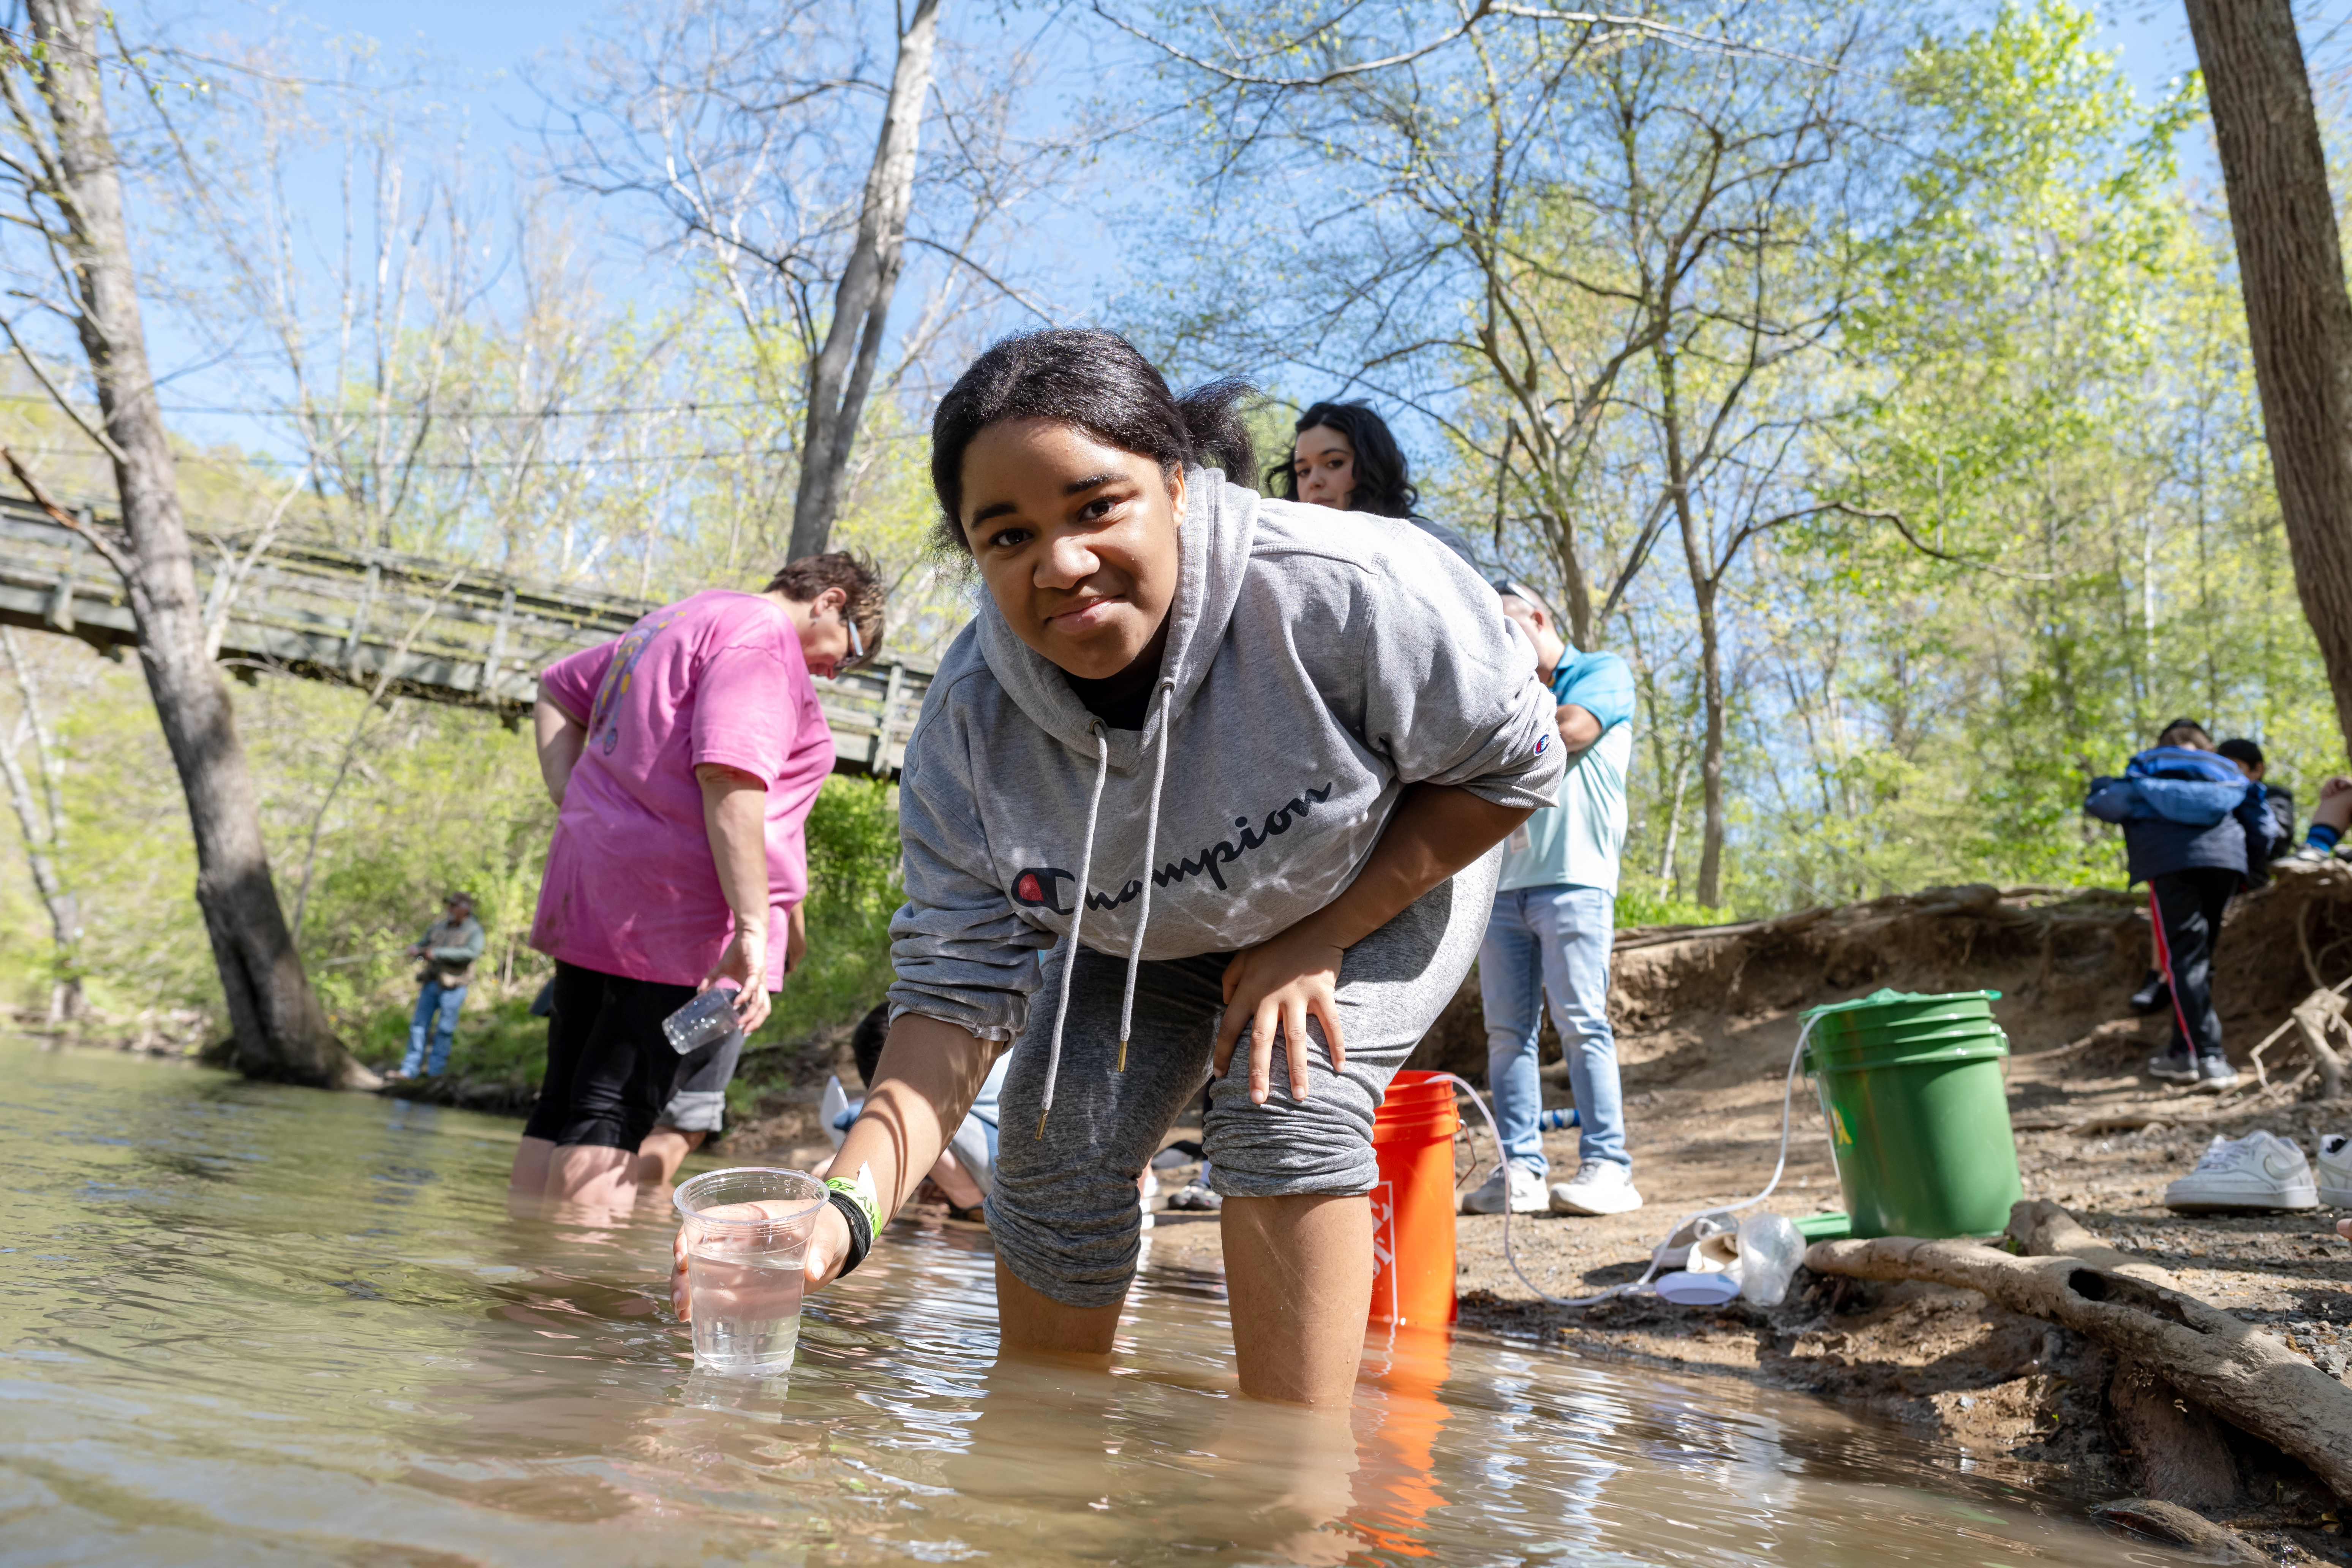 A student smiles as she holds a cup containing a fry in the ankle-deep waters of the stream.